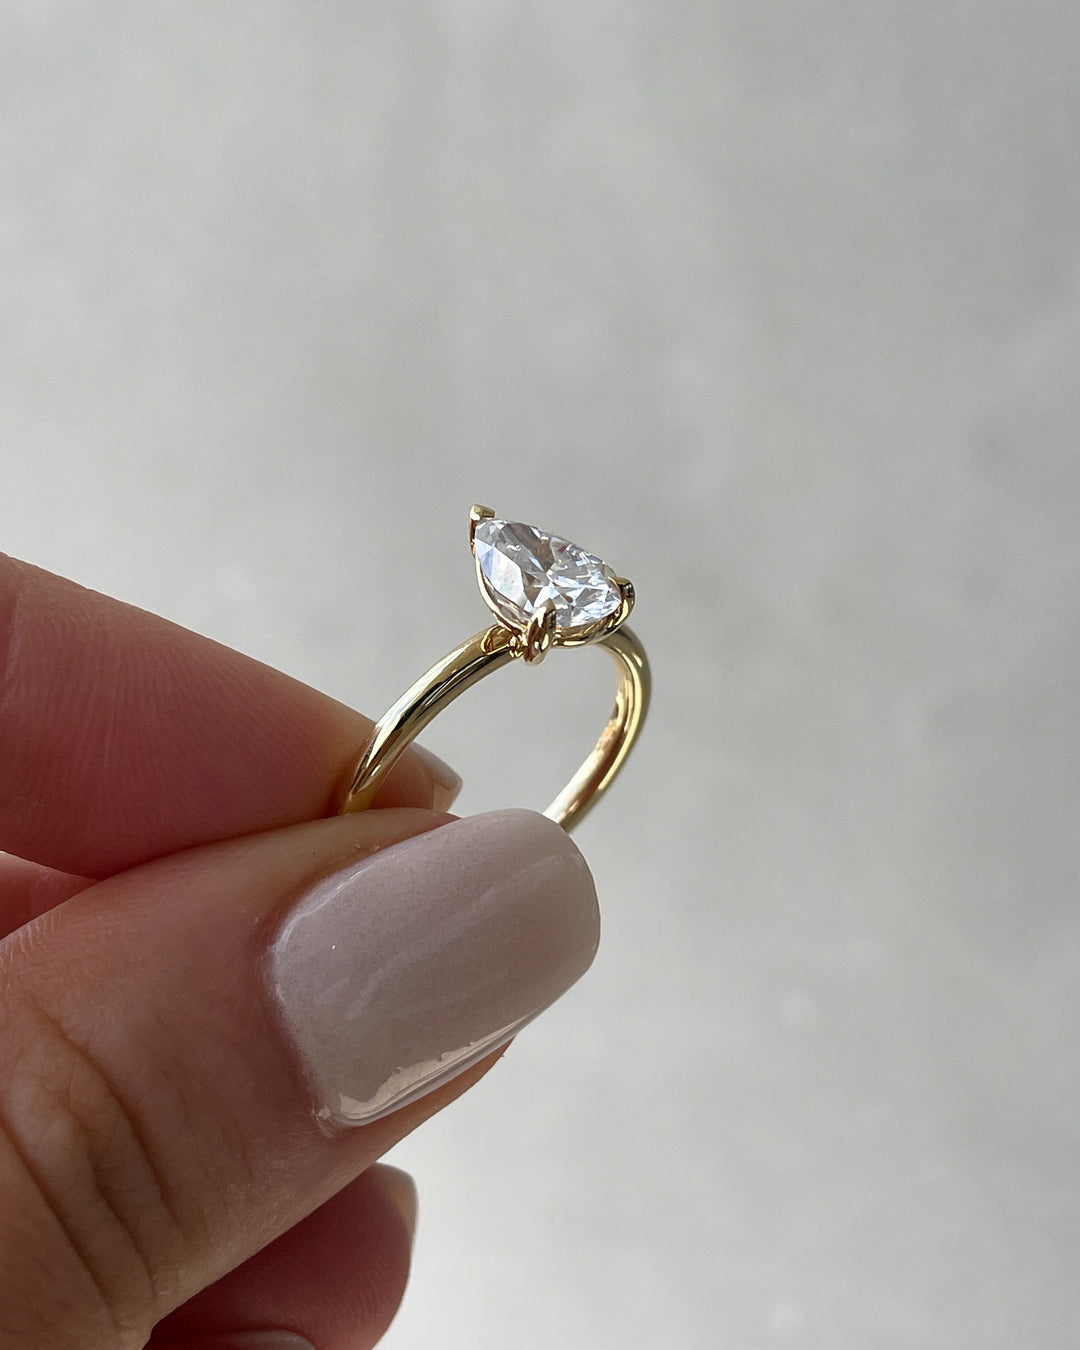 1.80 CT Pear Solitaire Style E/VS1 Lab Grown Diamond Engagement Ring